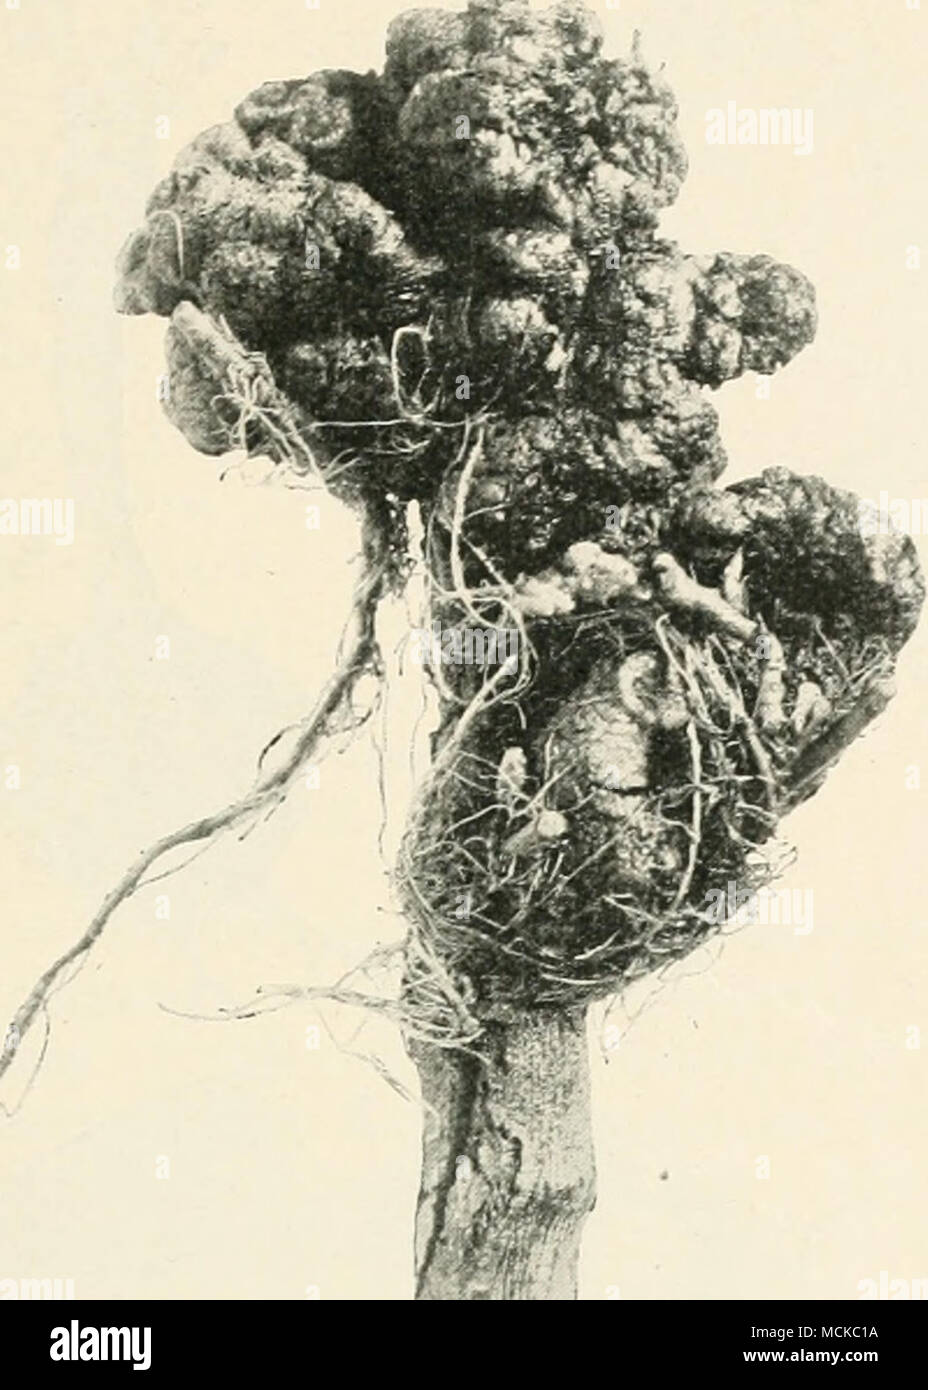 . *«&amp; Fig. 156.—Plasmodiophora brassicae, causing finger-and-toe of root of Brussels-sprout. and-toe known; from five to seven tons per acre, to be applied in the autumn, either six months or eighteen months before the turnips are sown. A second method, also recom- mended, is to apply the lime immediately after a diseased crop of turnips is removed; about two tons will suffice if it is spread evenly over the land. Such a dressing will produce no visible efiTect on finger-and-toe until the next crop of turnips is grown, but it may prove to be of value to interven- ing crops. It is important Stock Photo